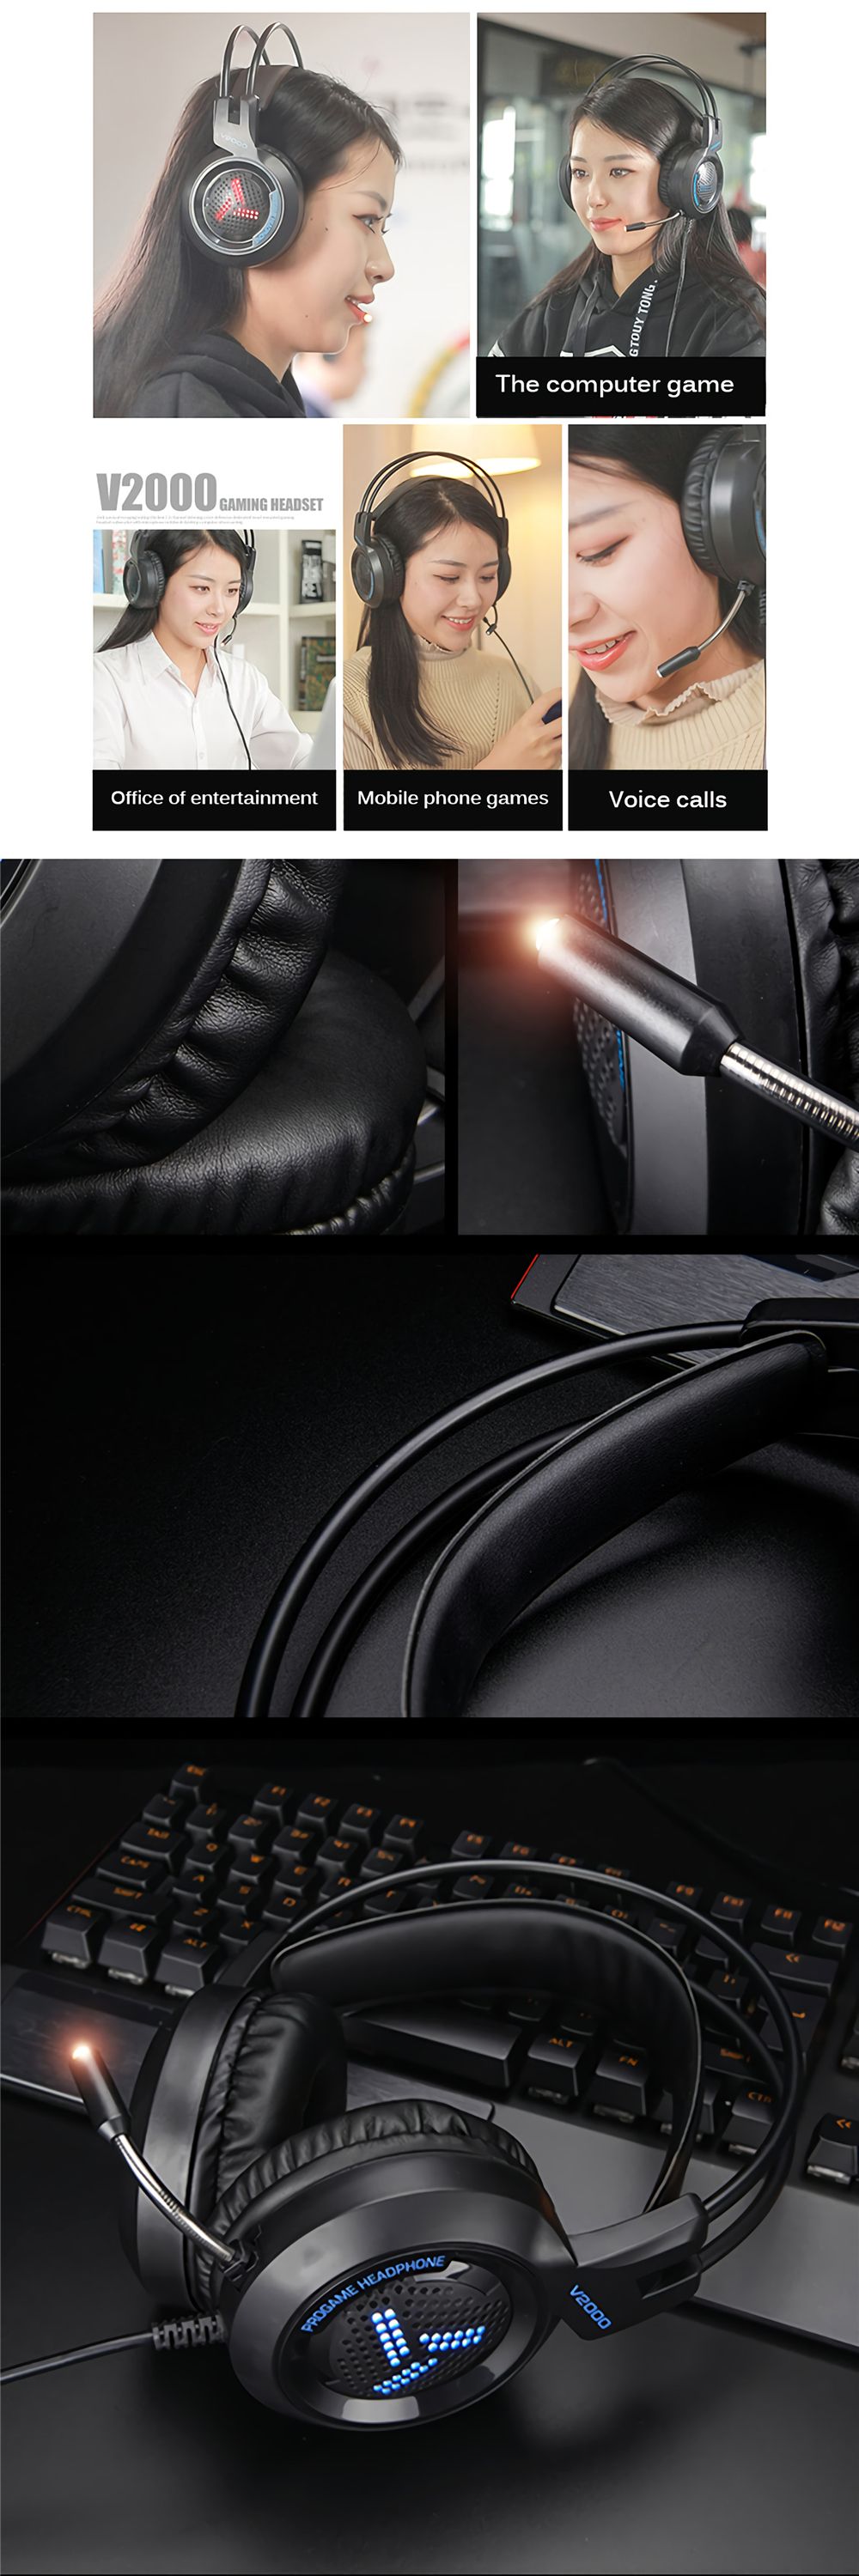 V2000-Game-Headset-71-Stereo-Surround-Sound-LED-Colorful-Gaming-Headphone-with-Mic-for-Xbox-1-PS4-Co-1720601